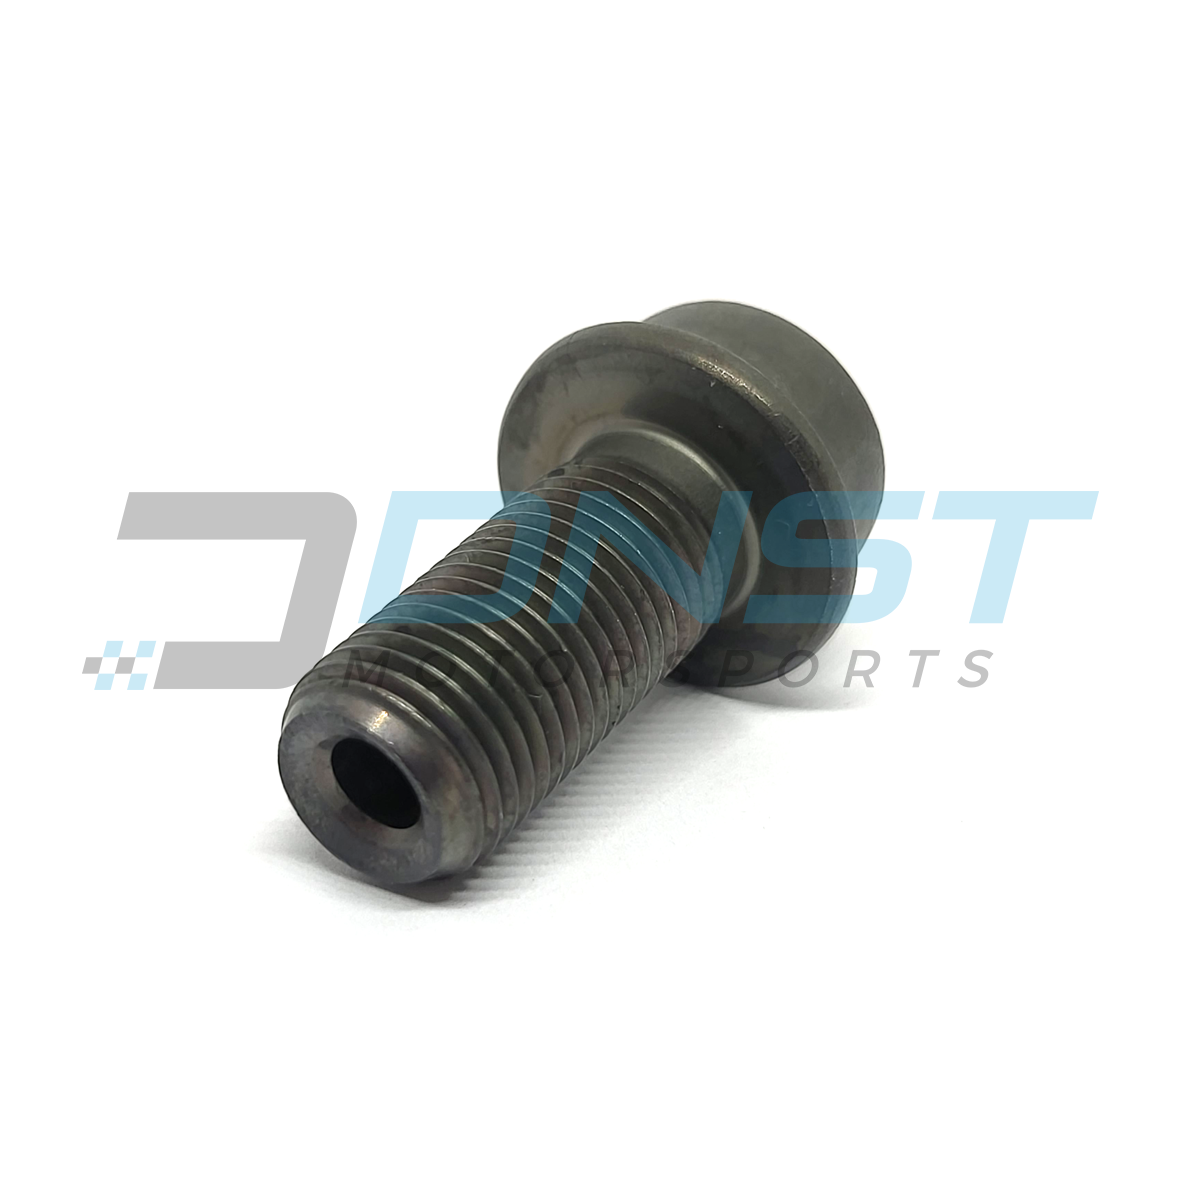 a hex headed steel threaded bolt with a hollow centre on a white background and a DNST Motorsports watermark